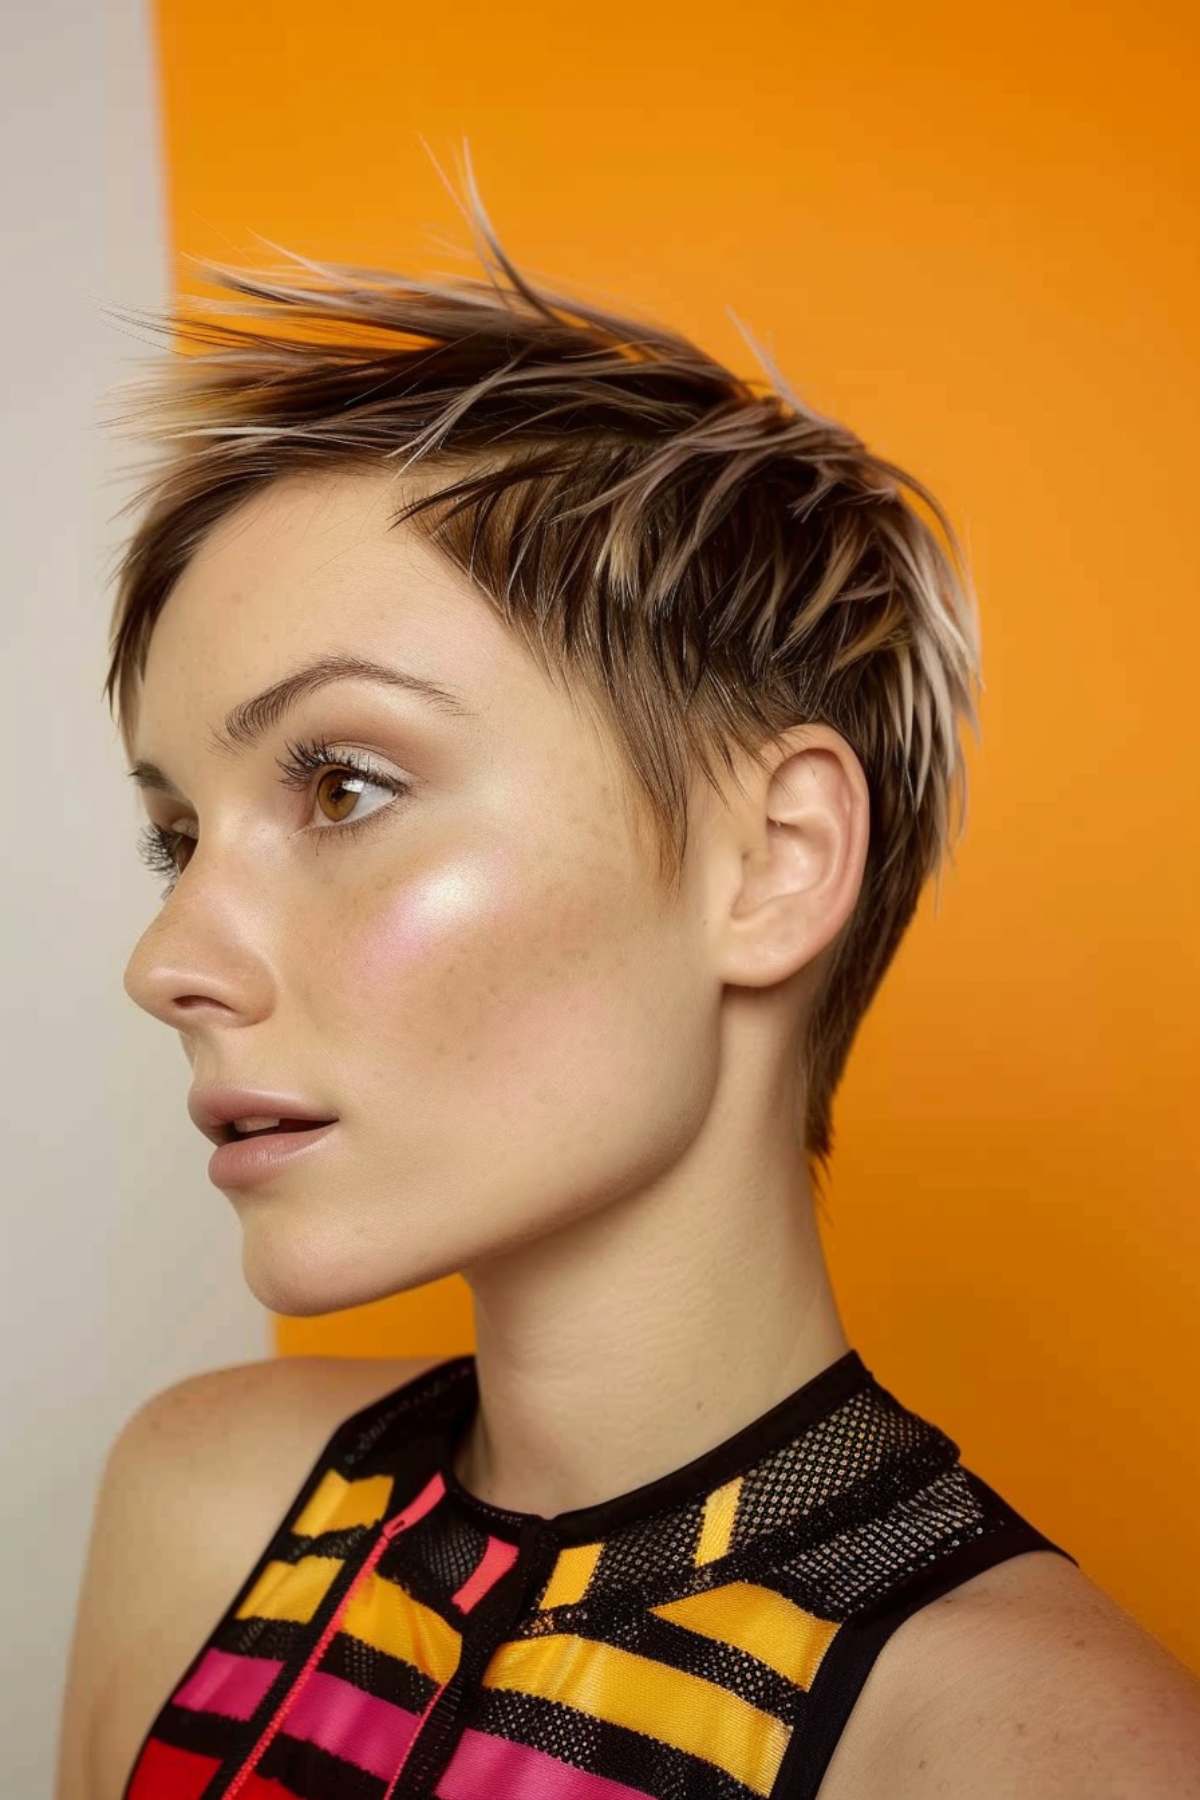 Woman with a dynamic short pixie cut featuring textured layers and strategic highlights, ideal for an active lifestyle requiring minimal hair maintenance.